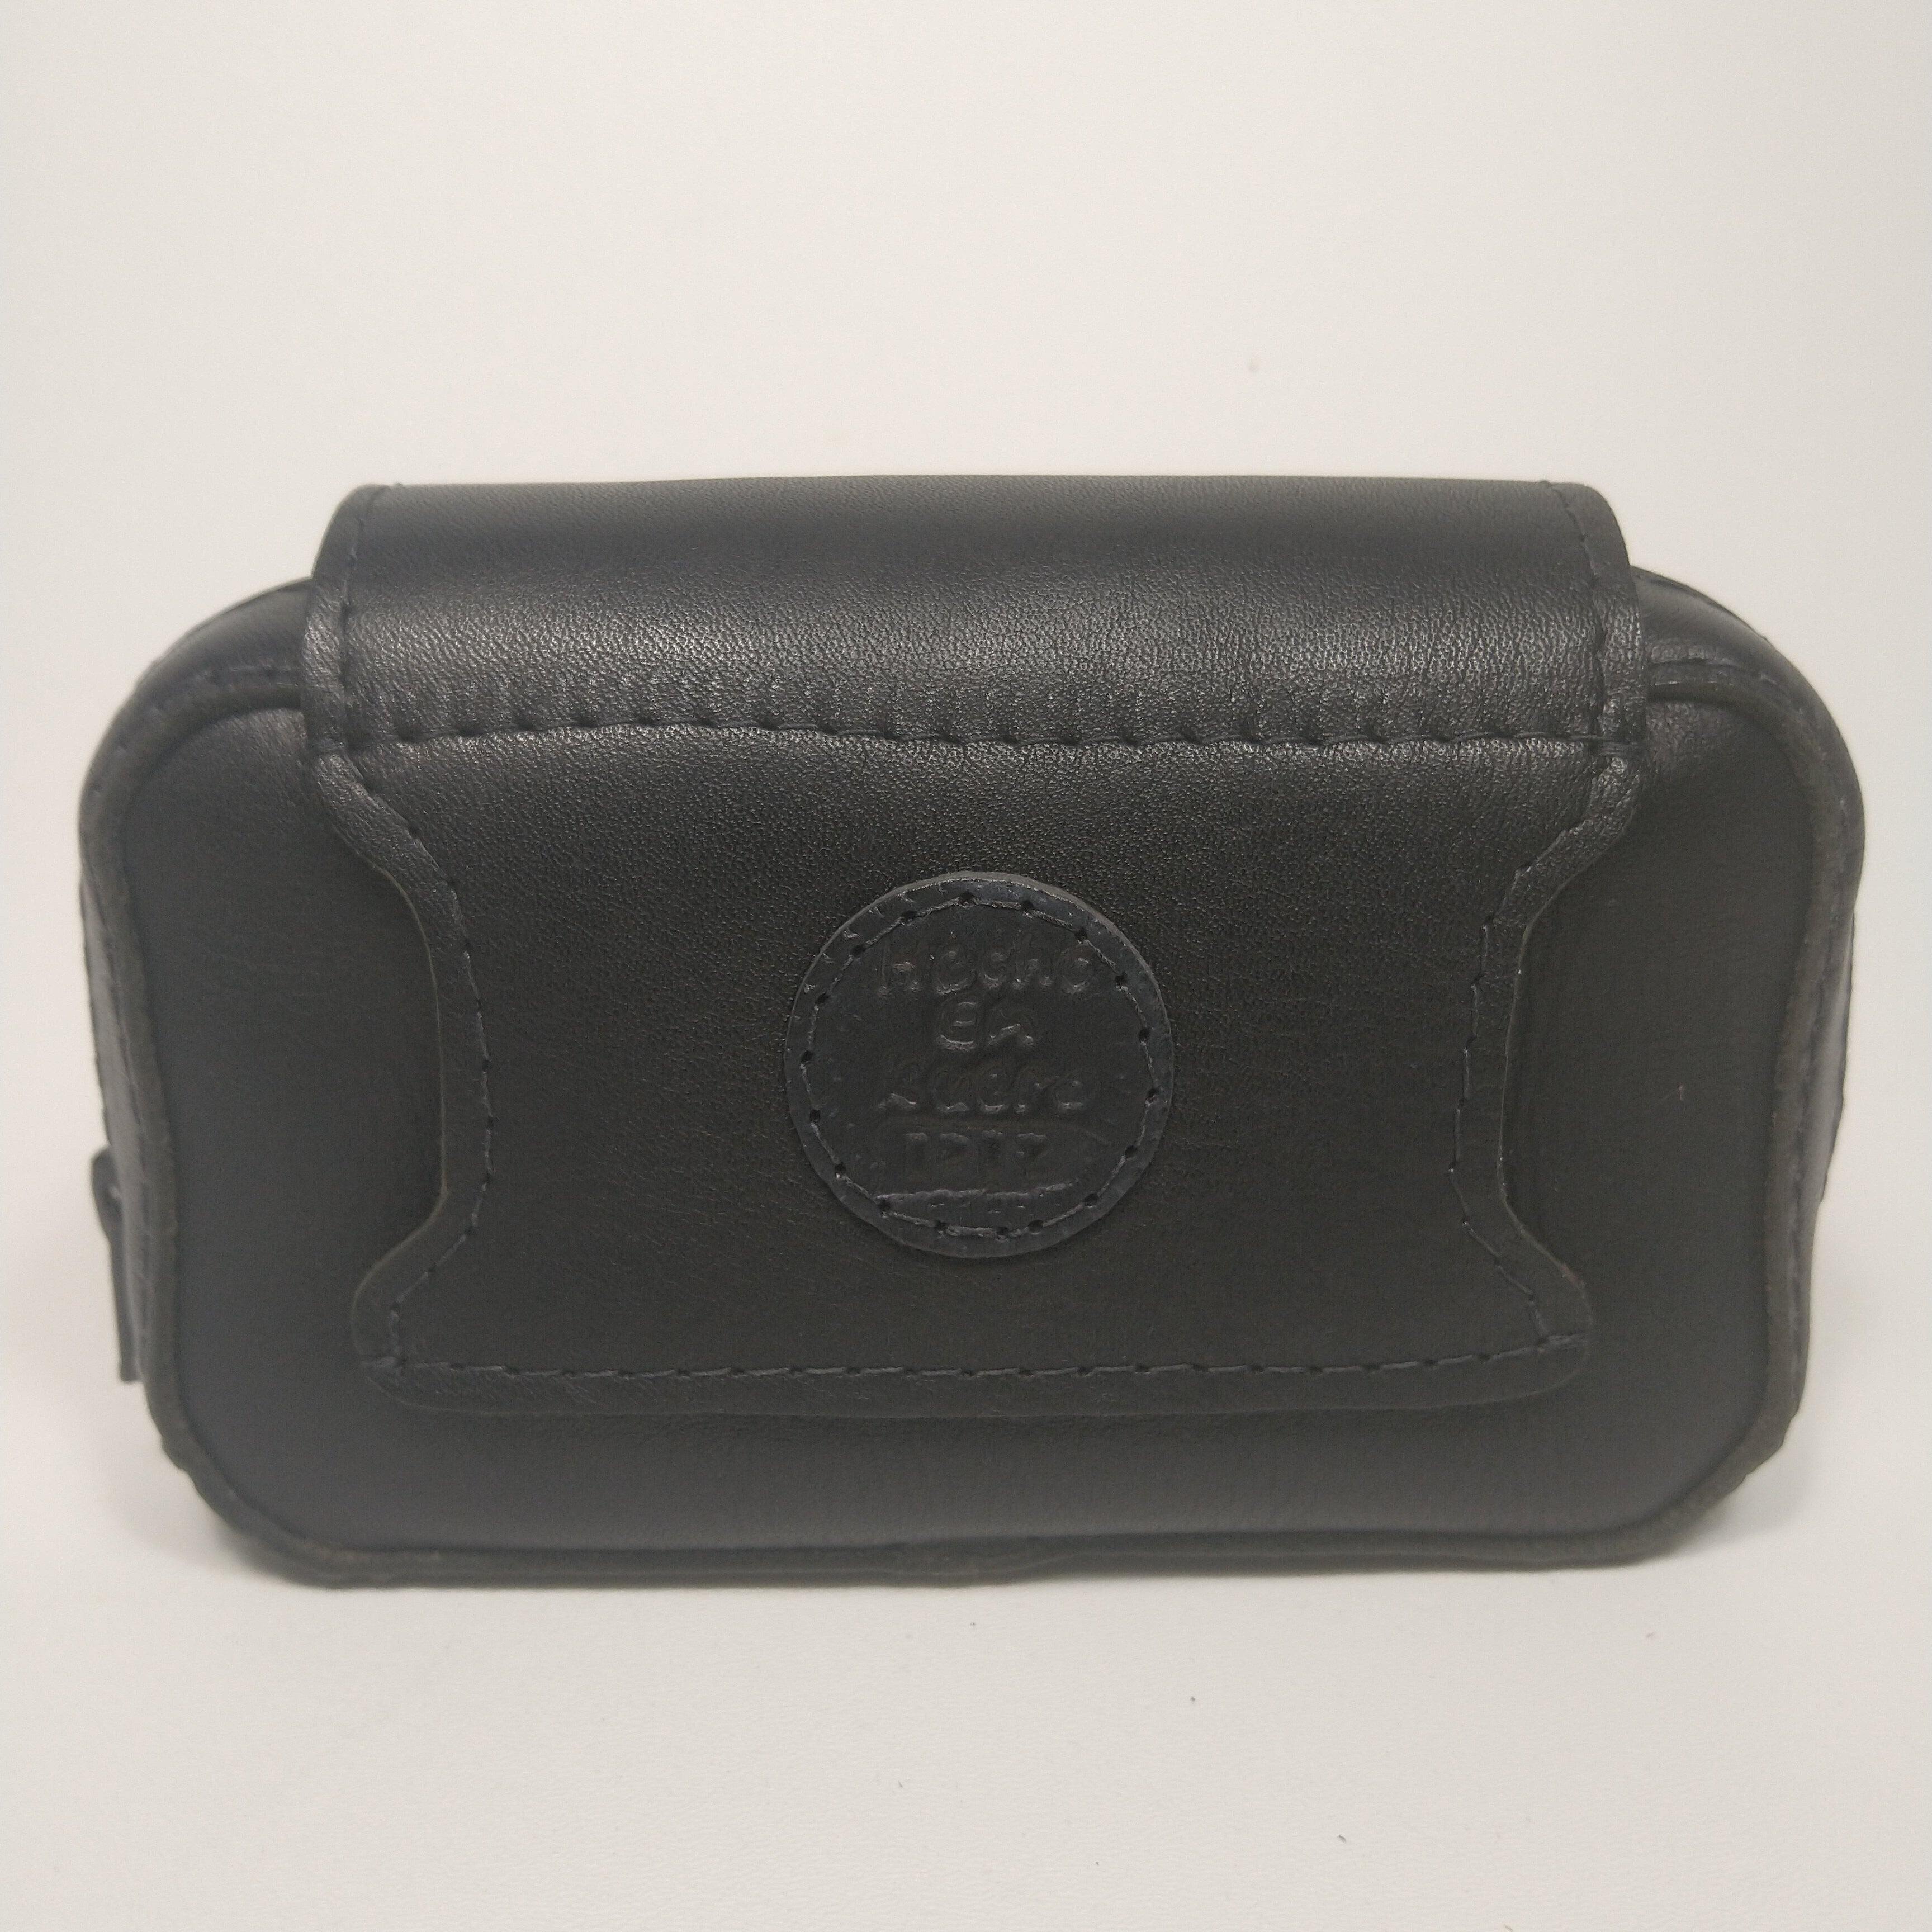 Fanny Compact (Black Action)